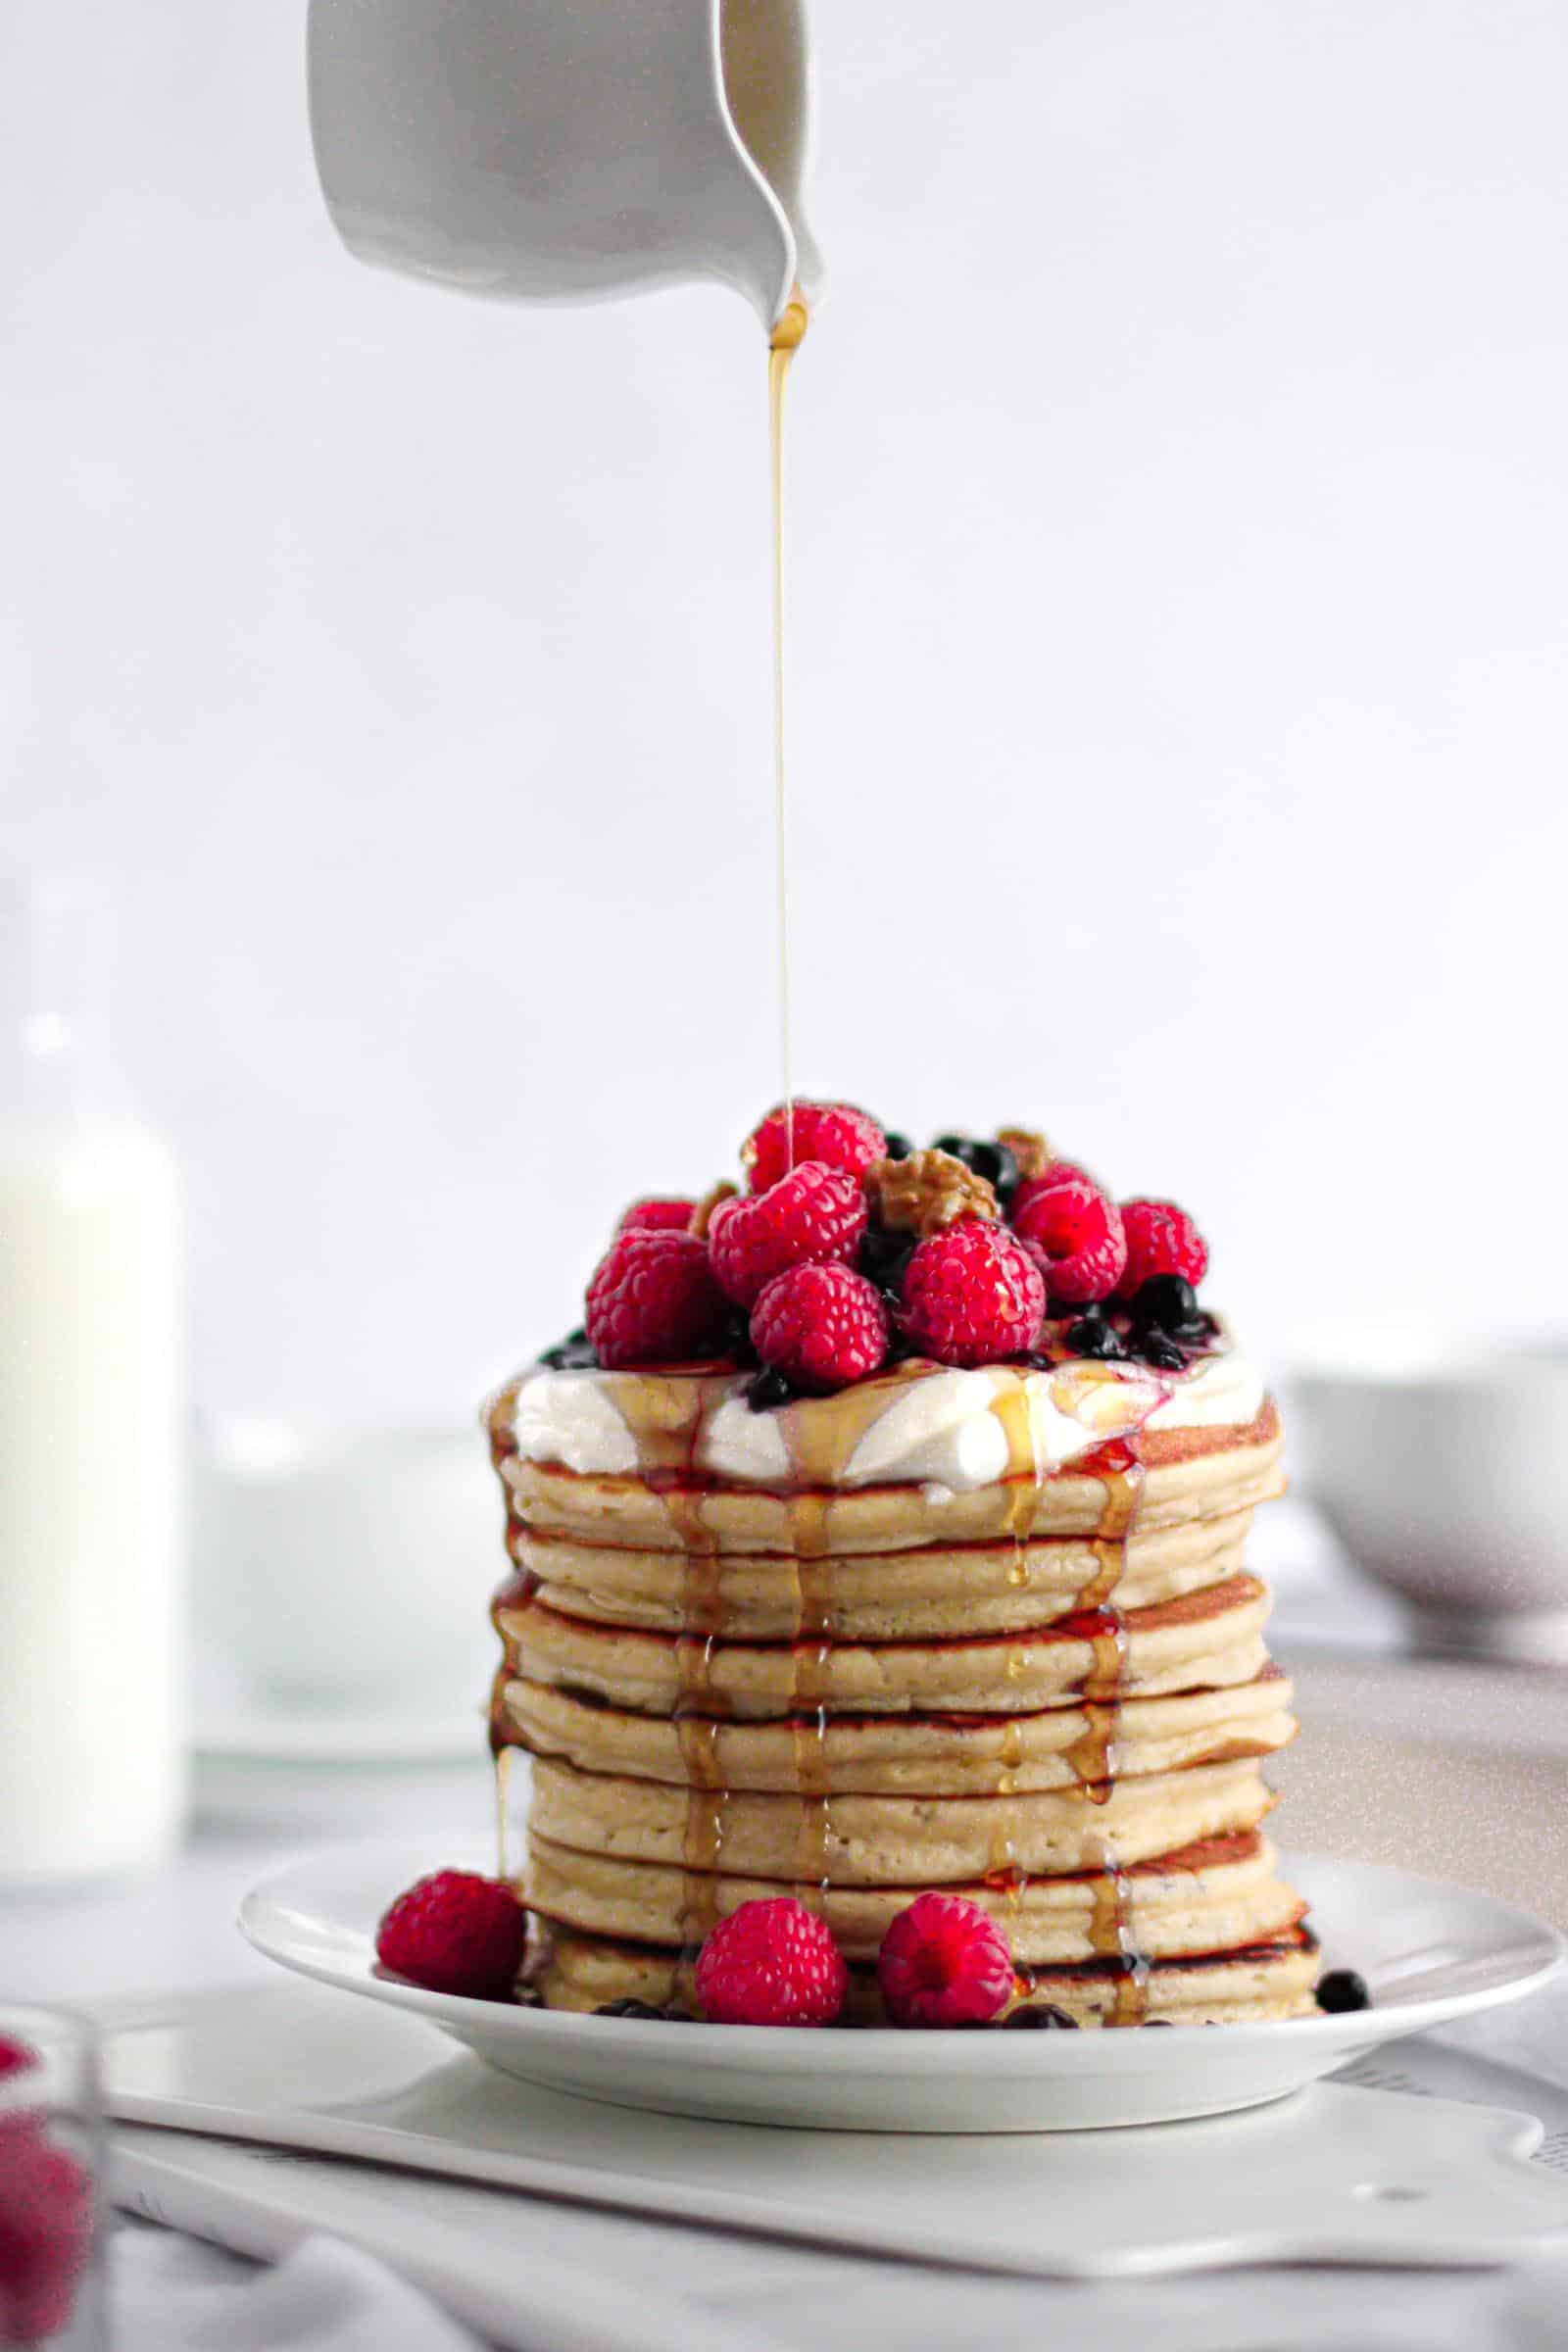 Pancakes thick and fluffy topped with fruits, yogurt and maple syrup